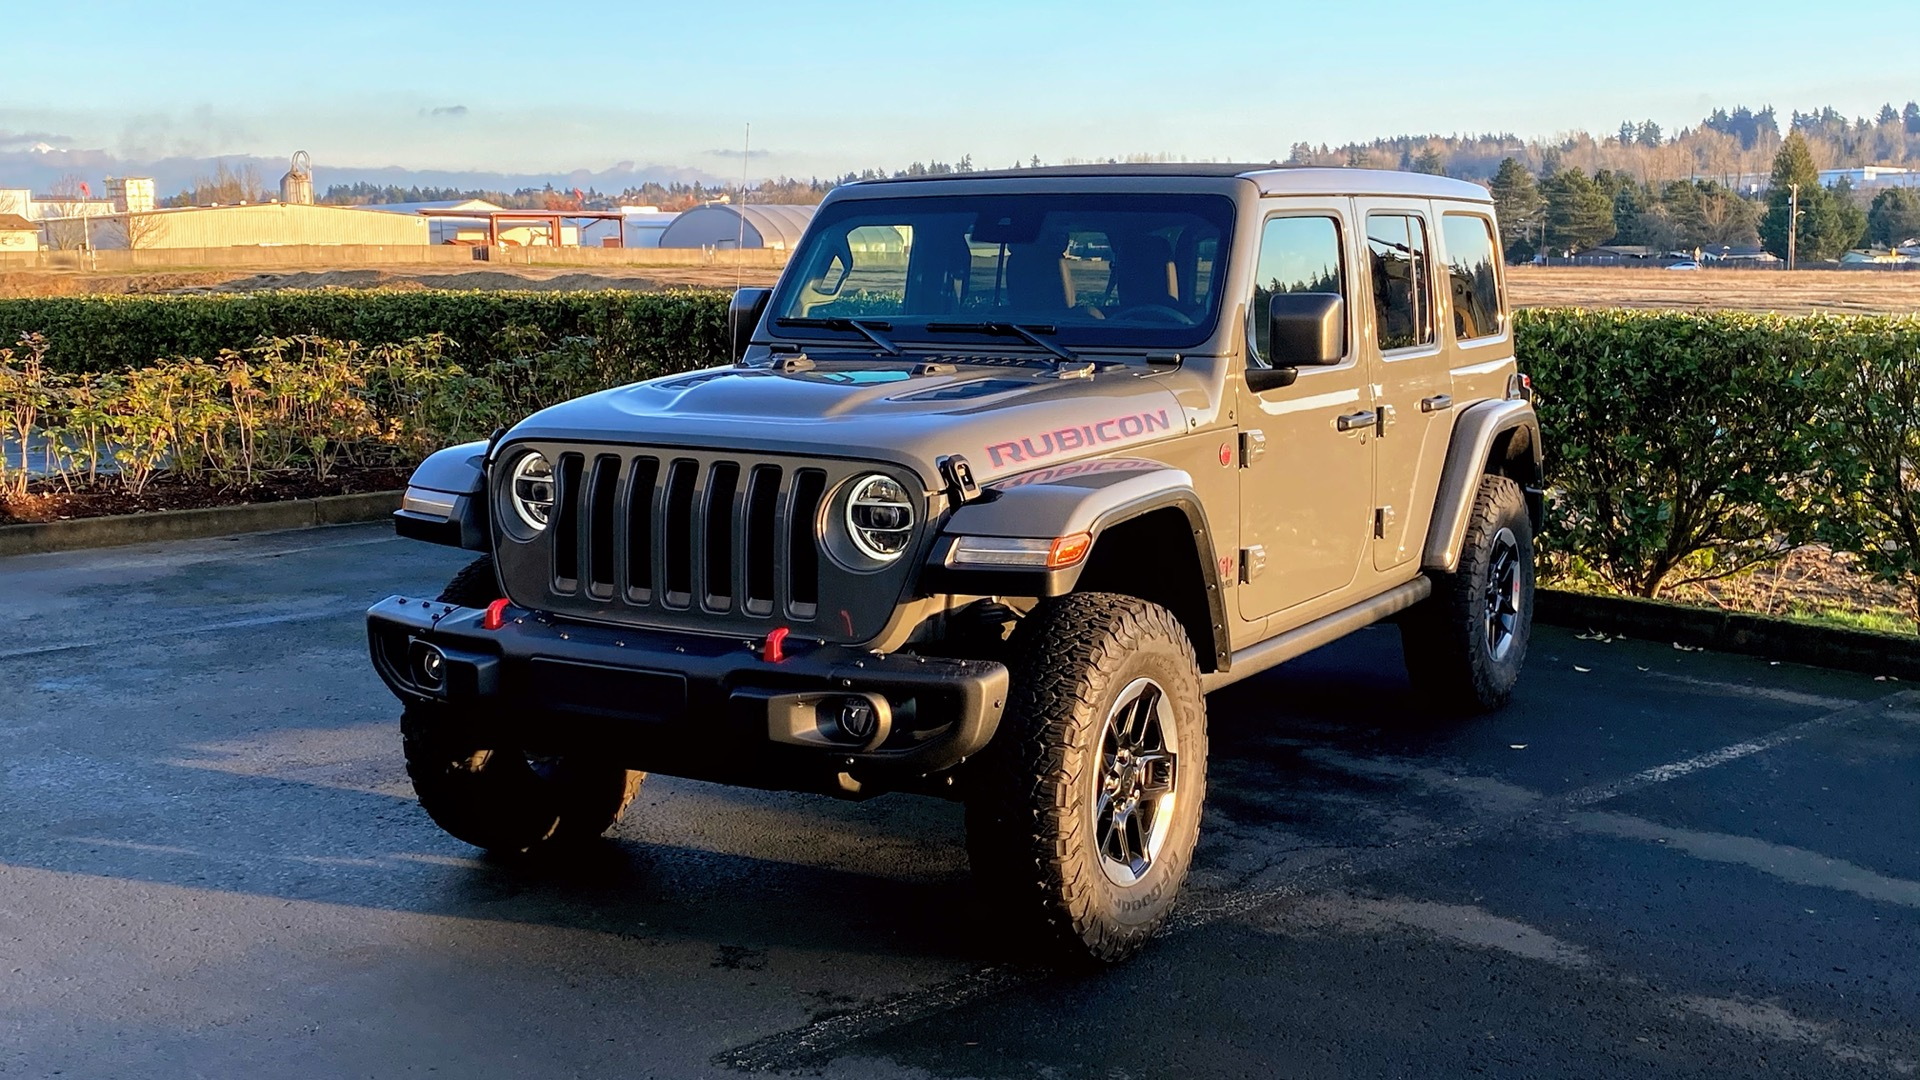 2020 Jeep Wrangler diesel drive review: On its way to treading lightly, but  not quite there